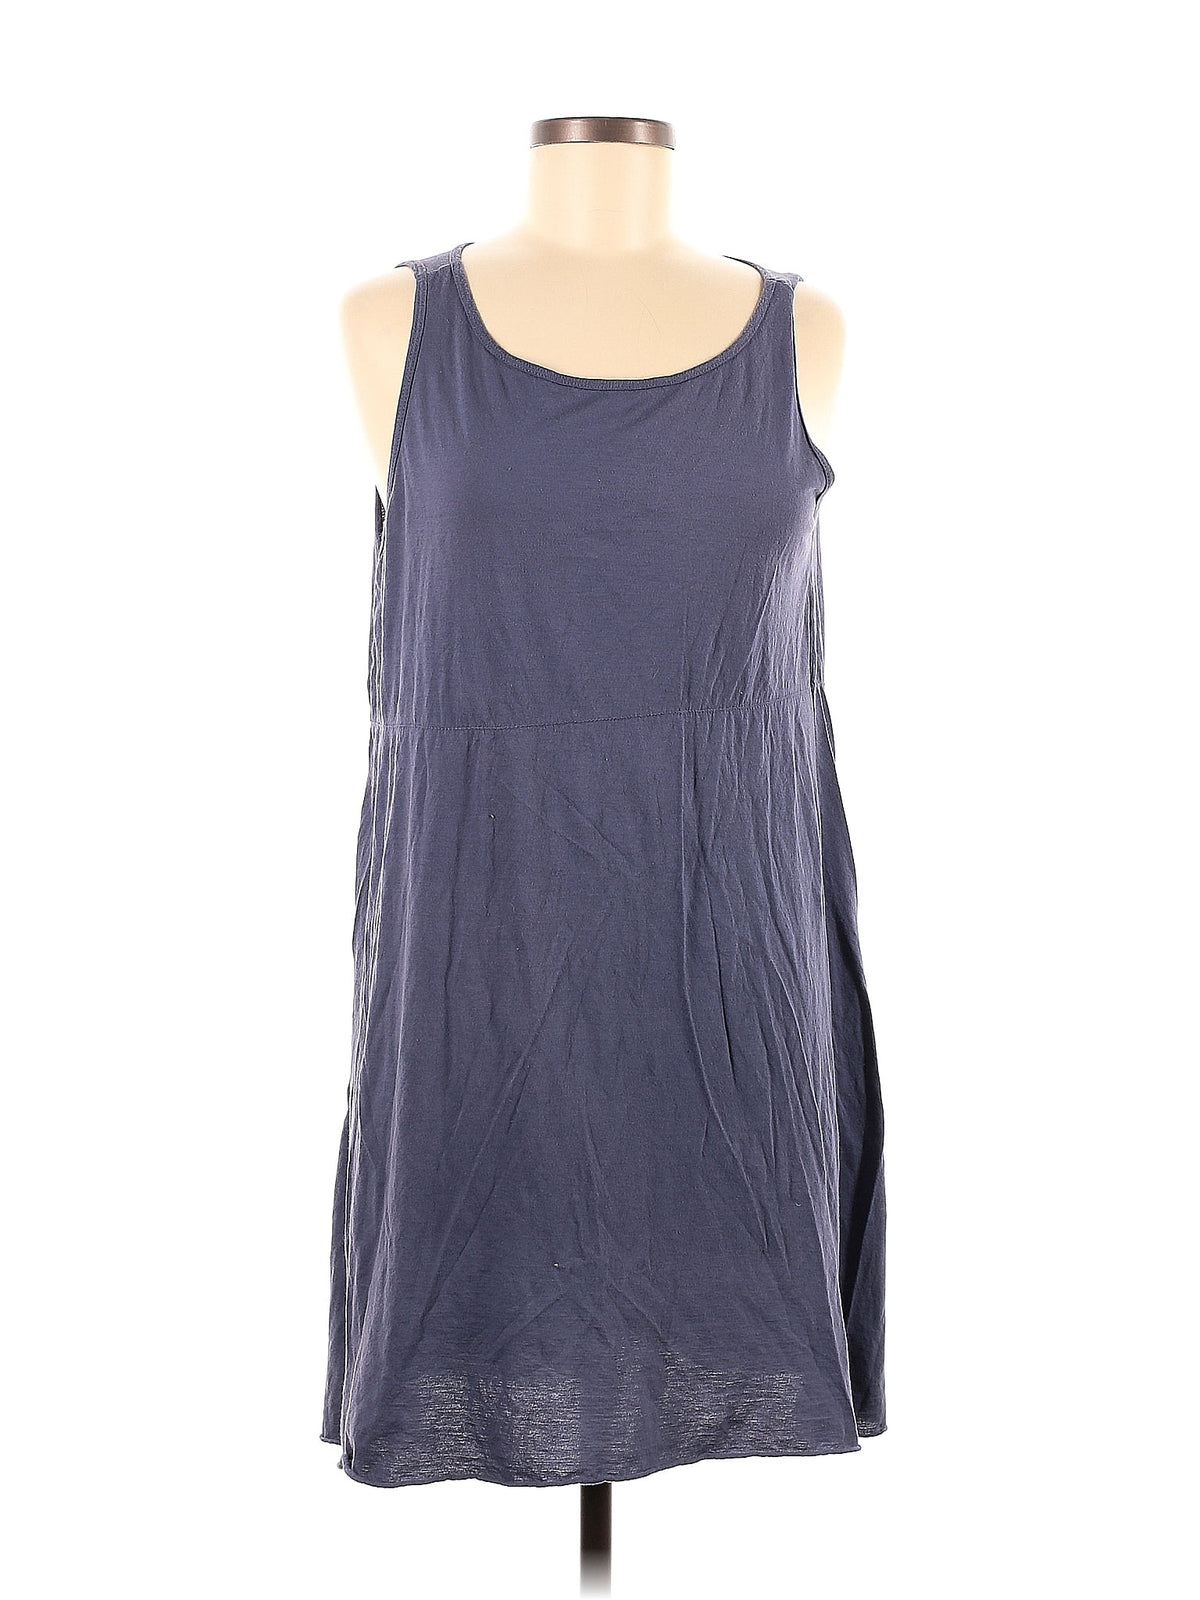 Casual Dress size - Med (1)